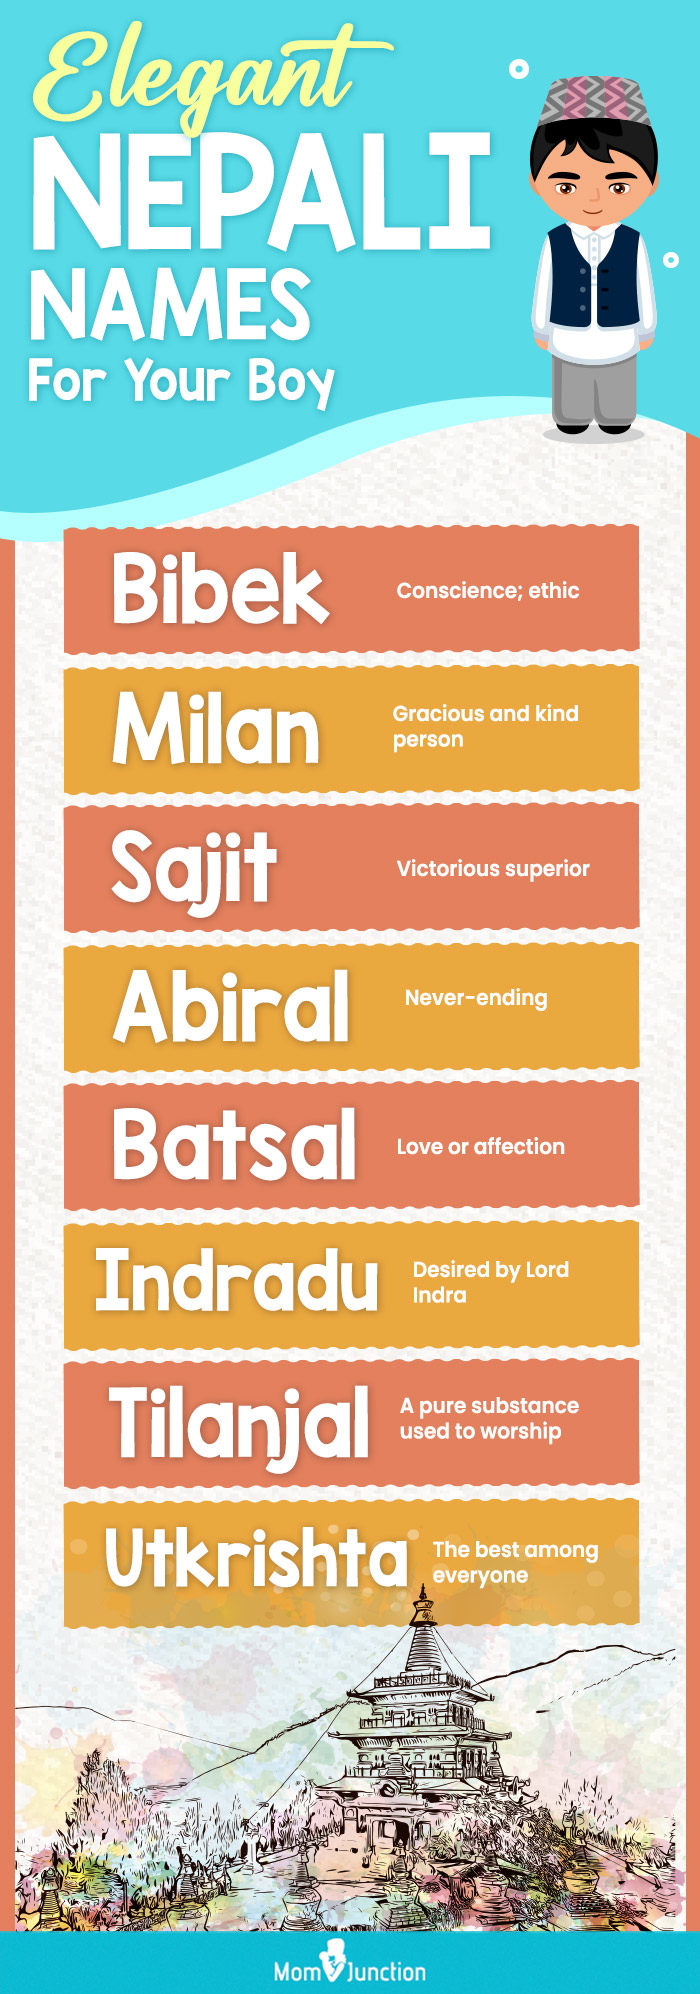 elegant nepali names for your boy (infographic)